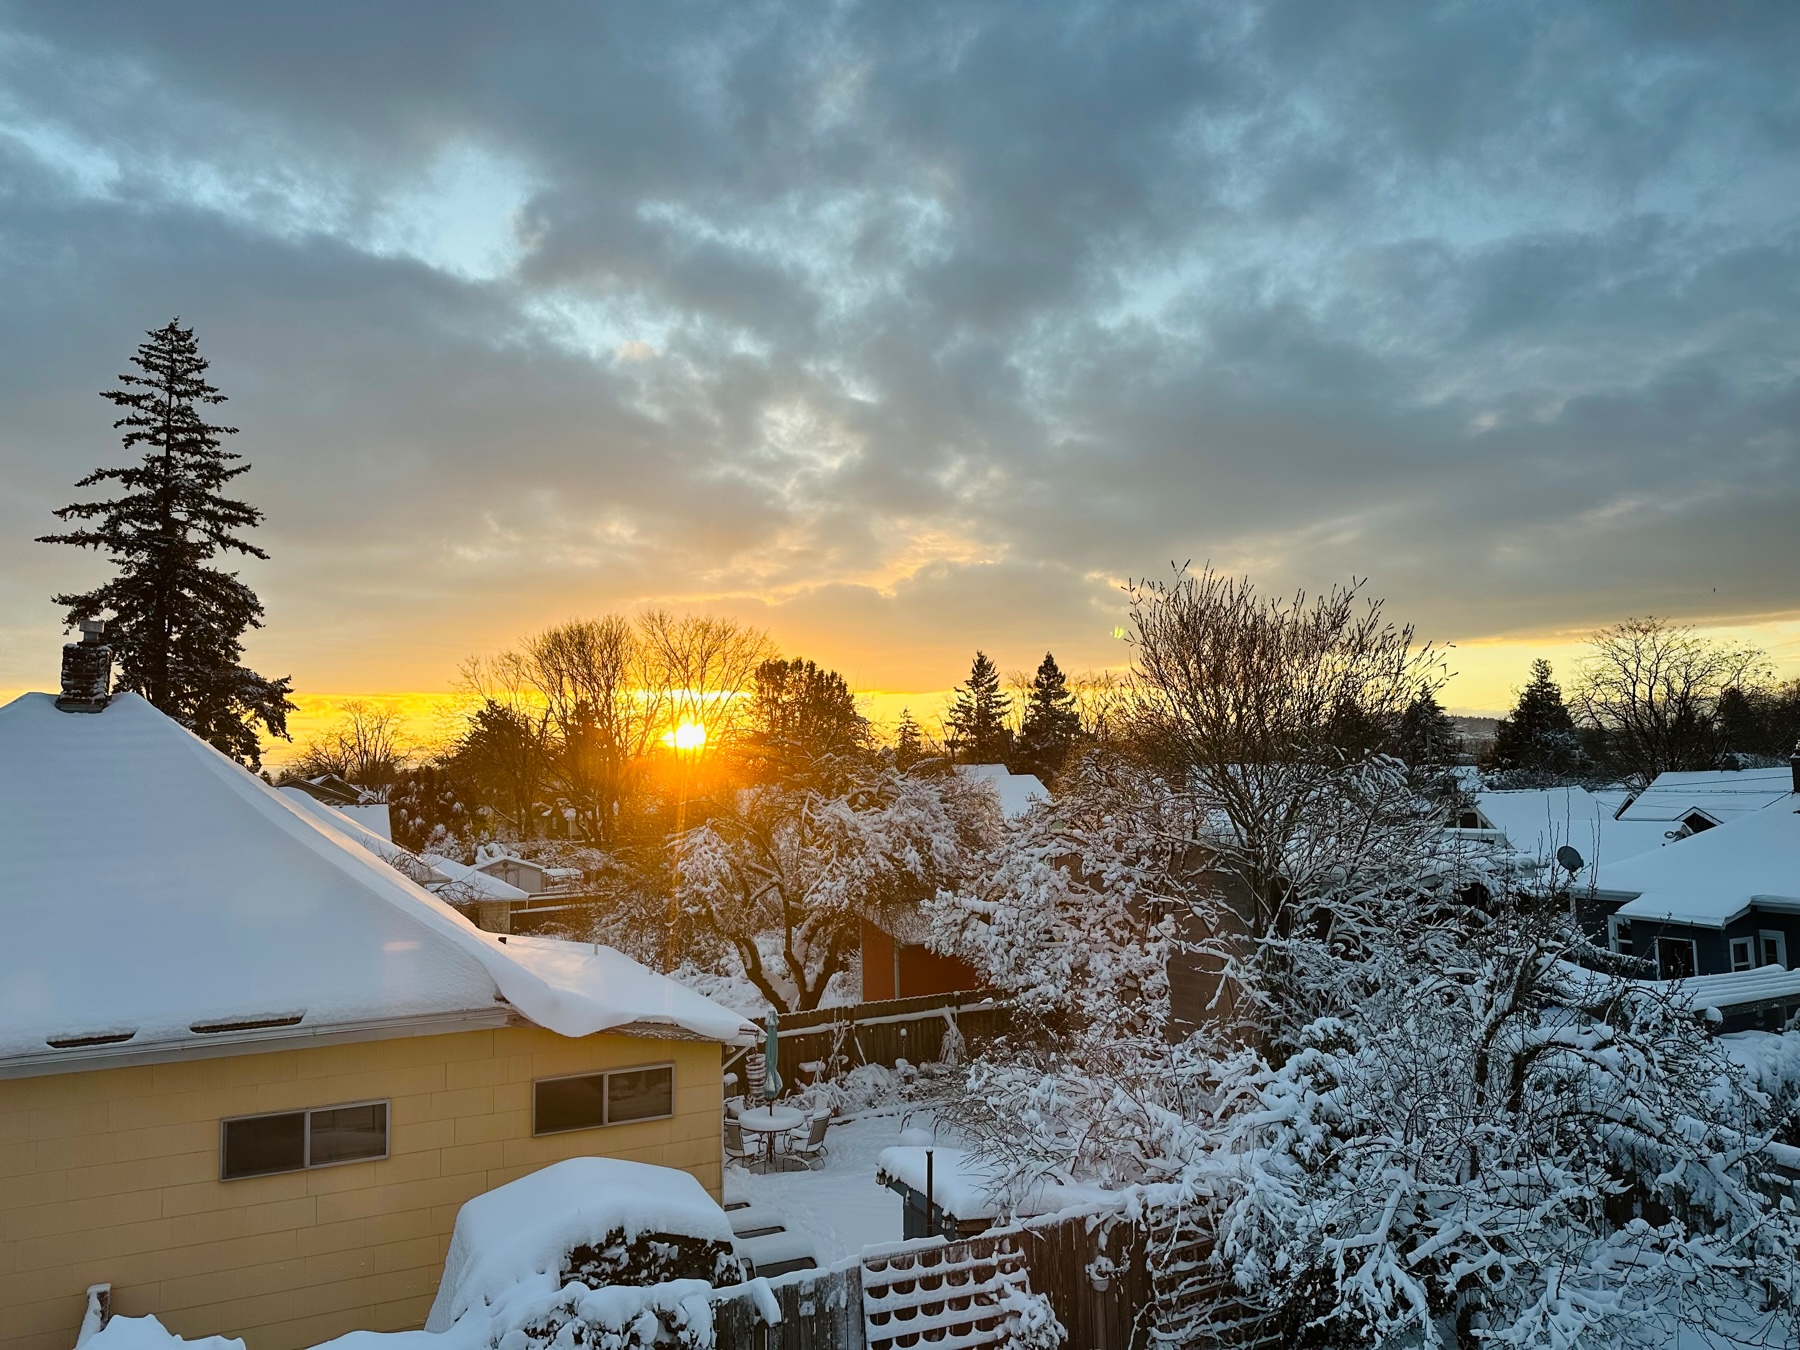 View of snow capped roofs and trees in the foreground. A rising golden sun on the horizon and cloudy sky above.